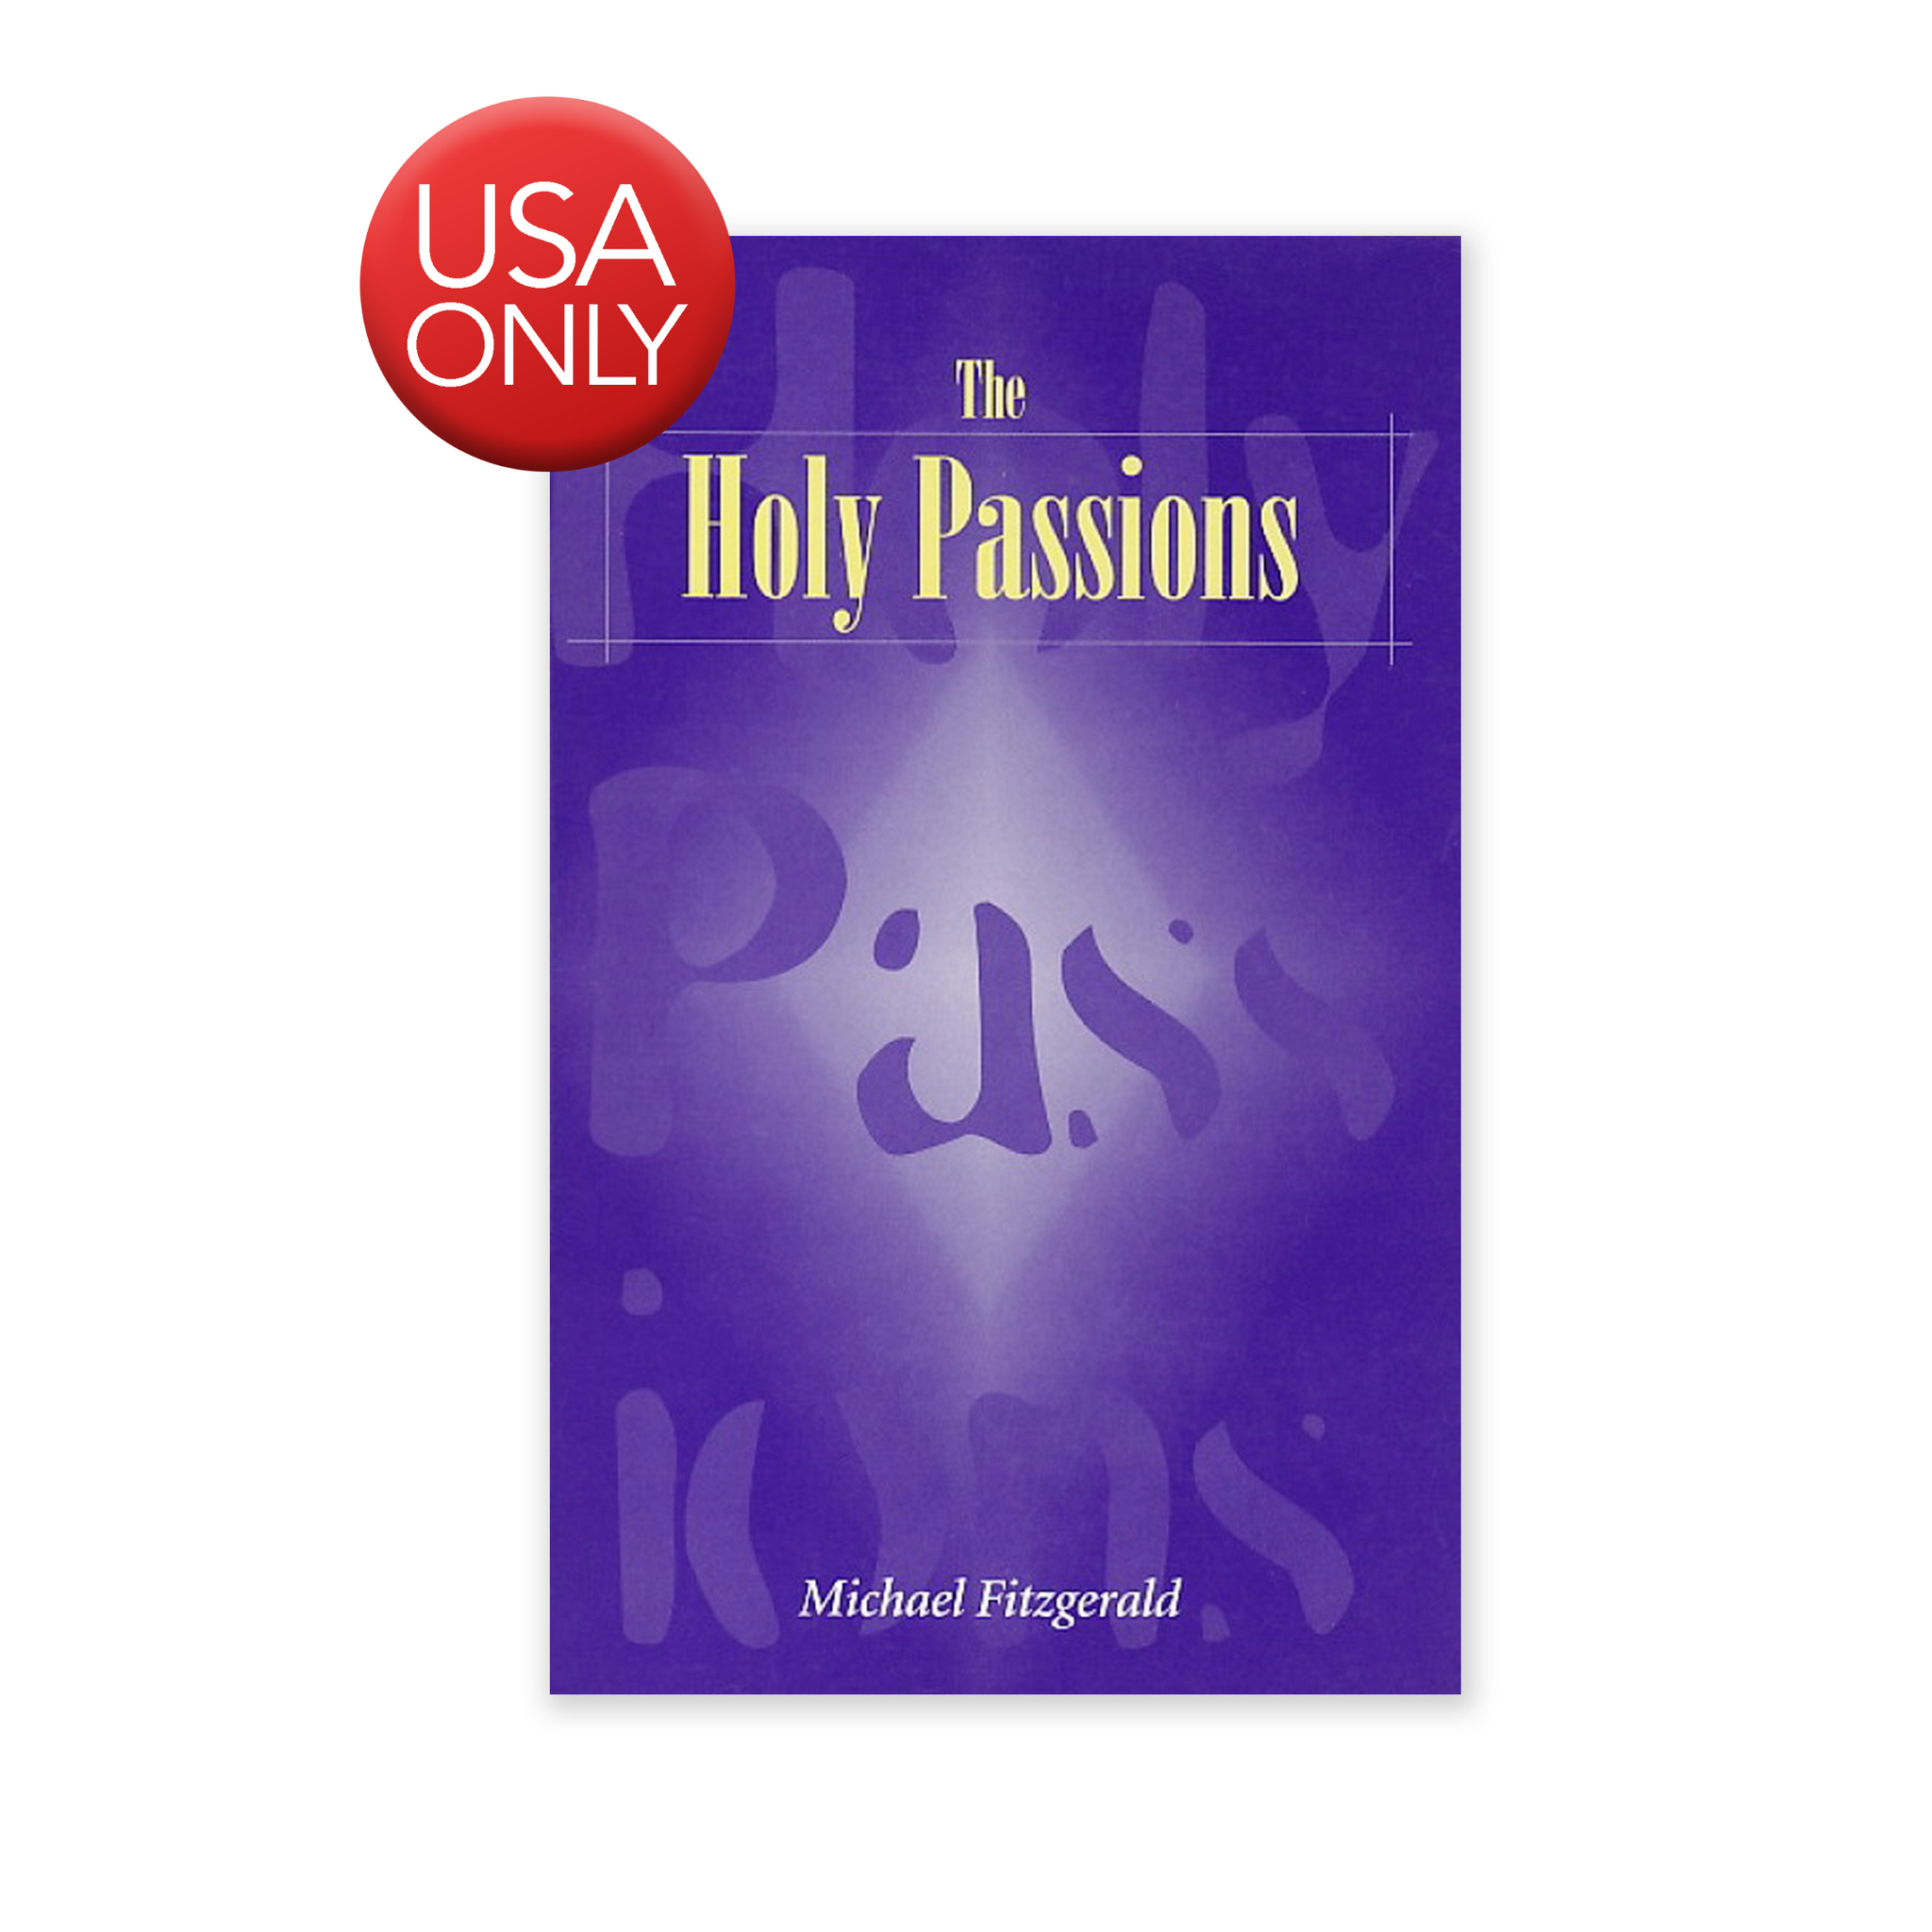 Holy Passions - A Collection of Poems